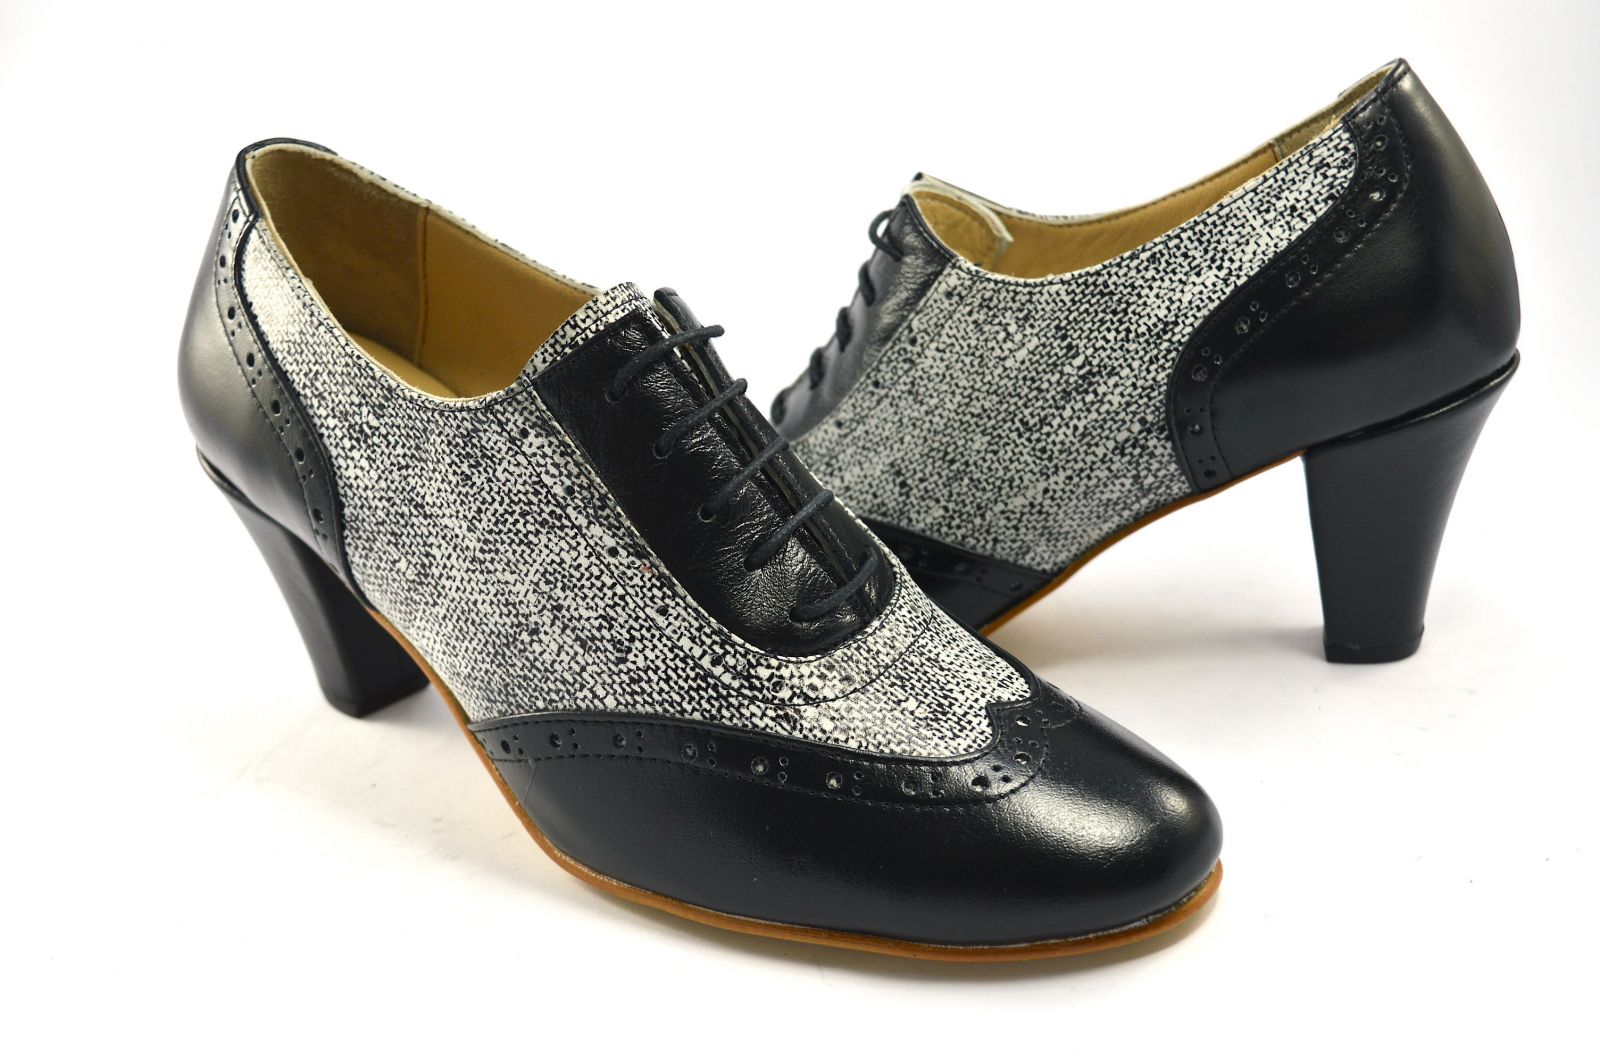 Women's Argentine Tango Shoe, oxford style, by soft black leather